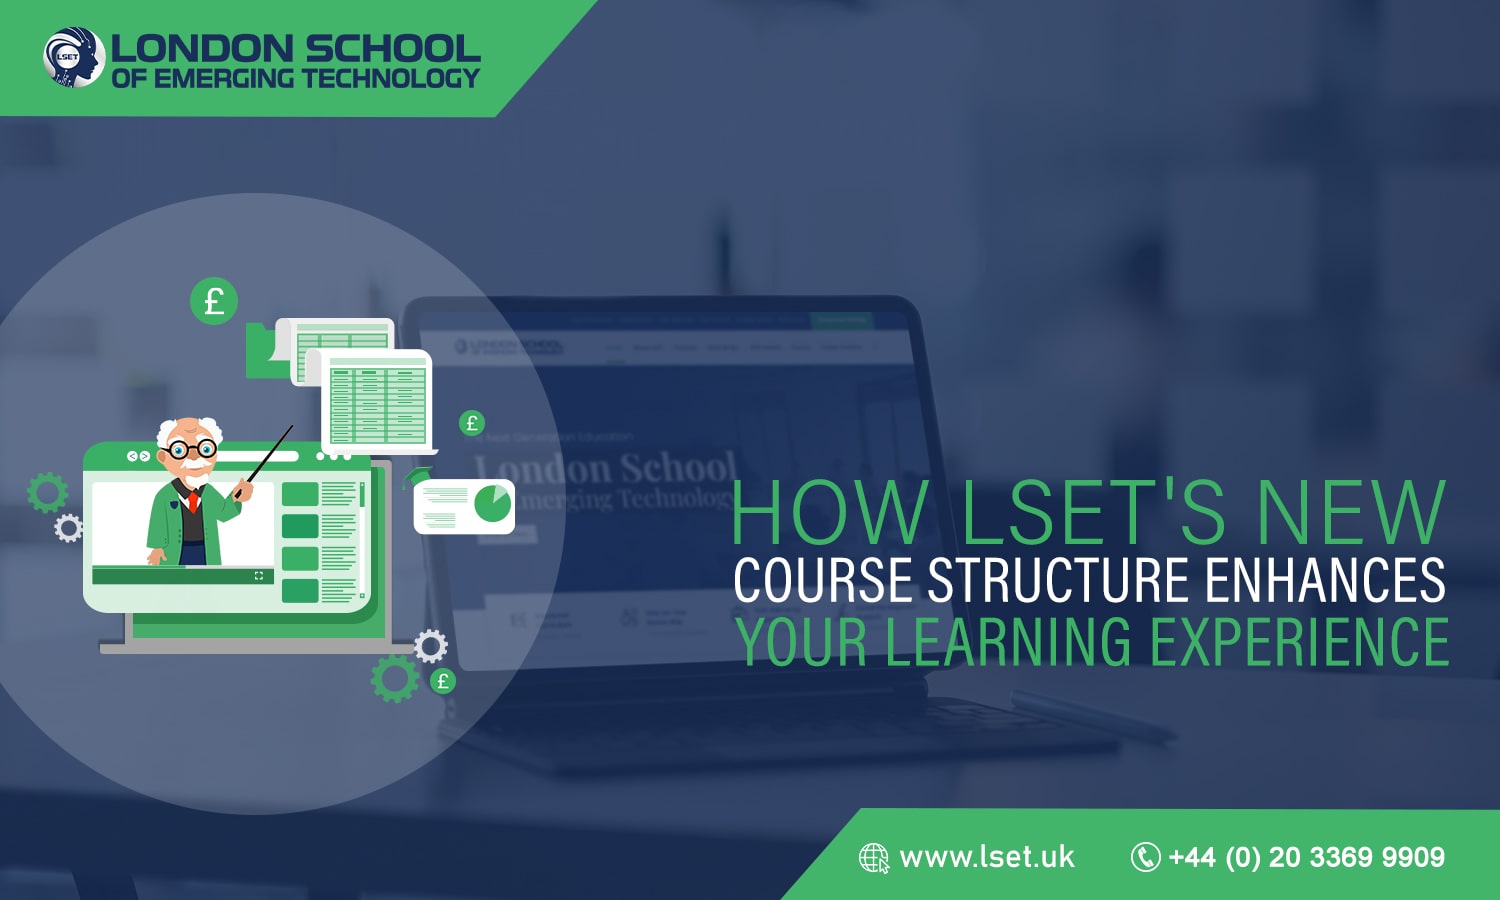 LSET's New Course